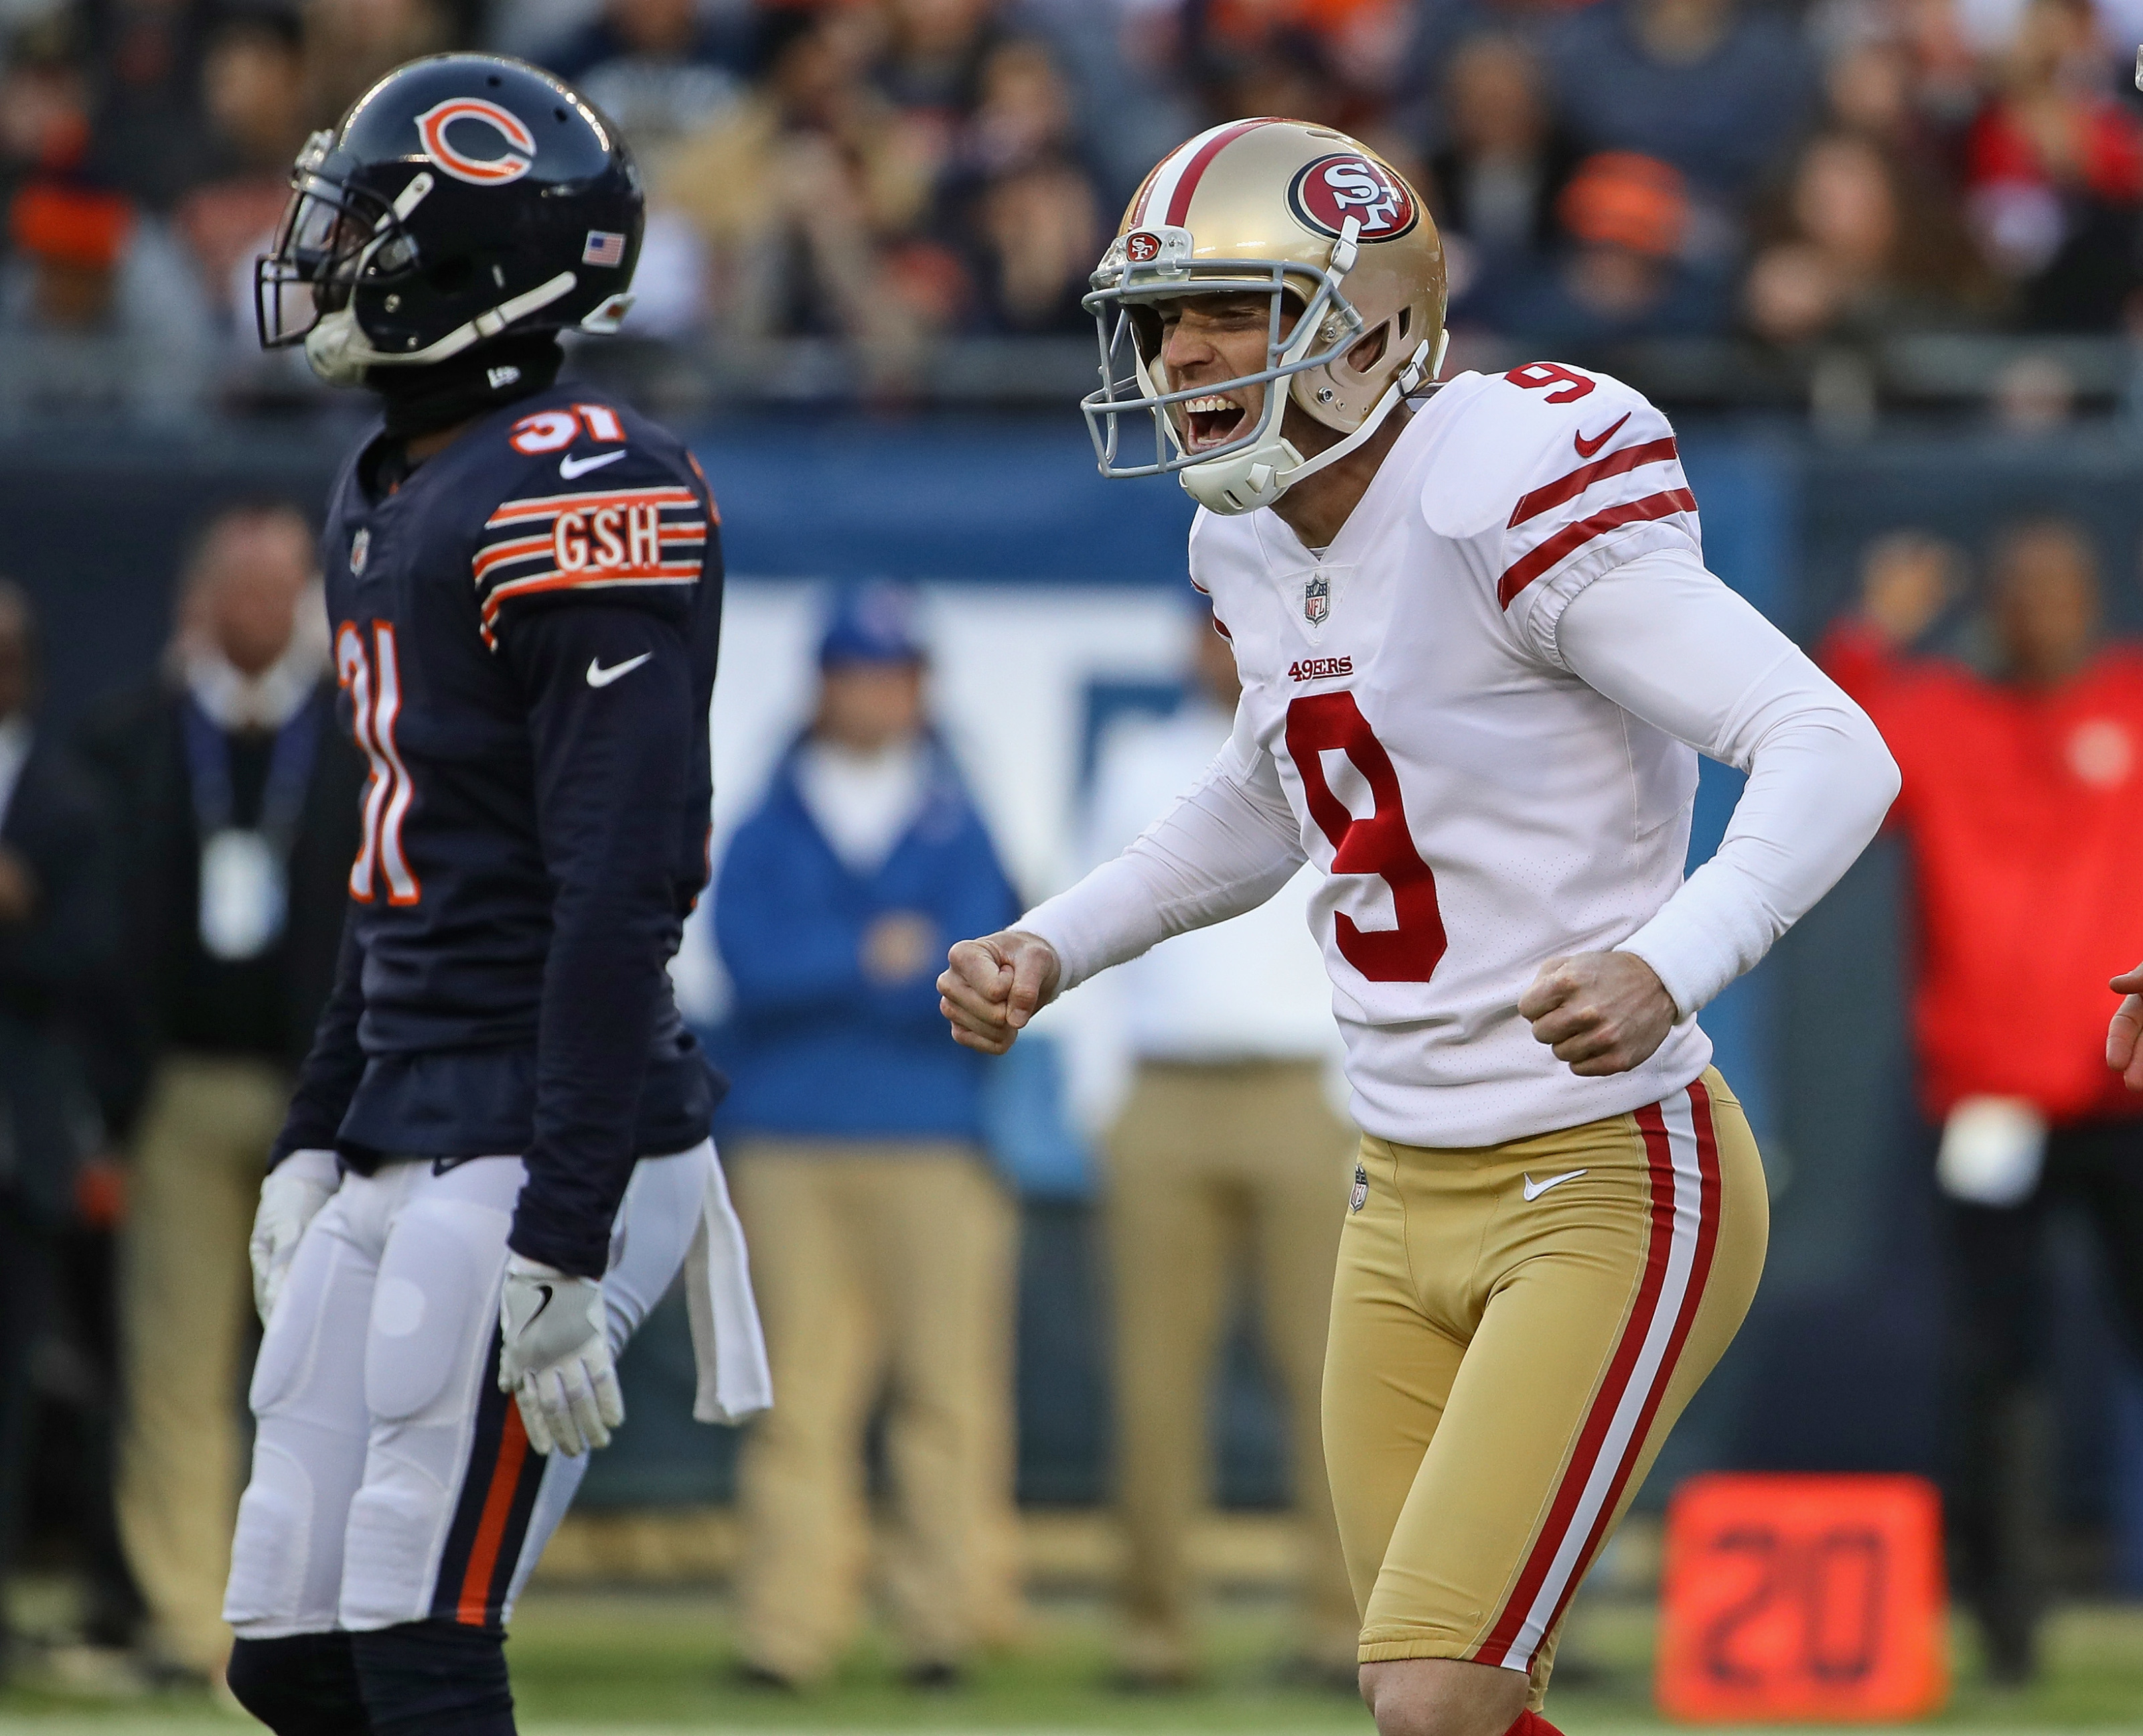 Chicago Bears: Robbie Gould explains his current situation